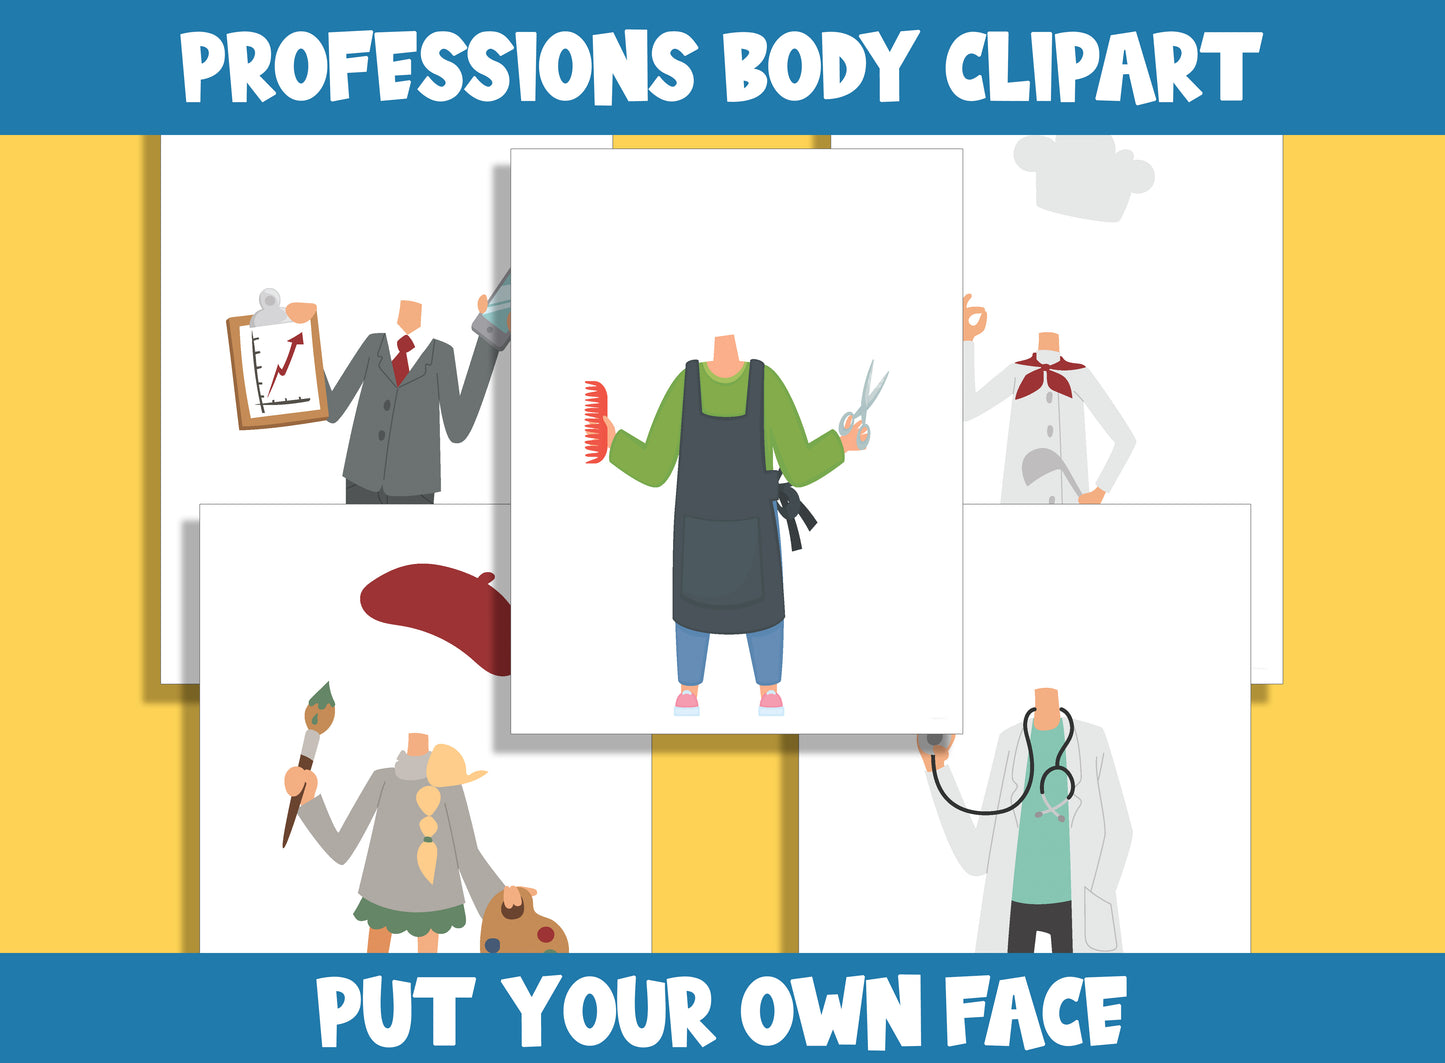 Professions Body Clipart, Color, Cut, & Glue, Put Your Own Face, for PreK to 7th